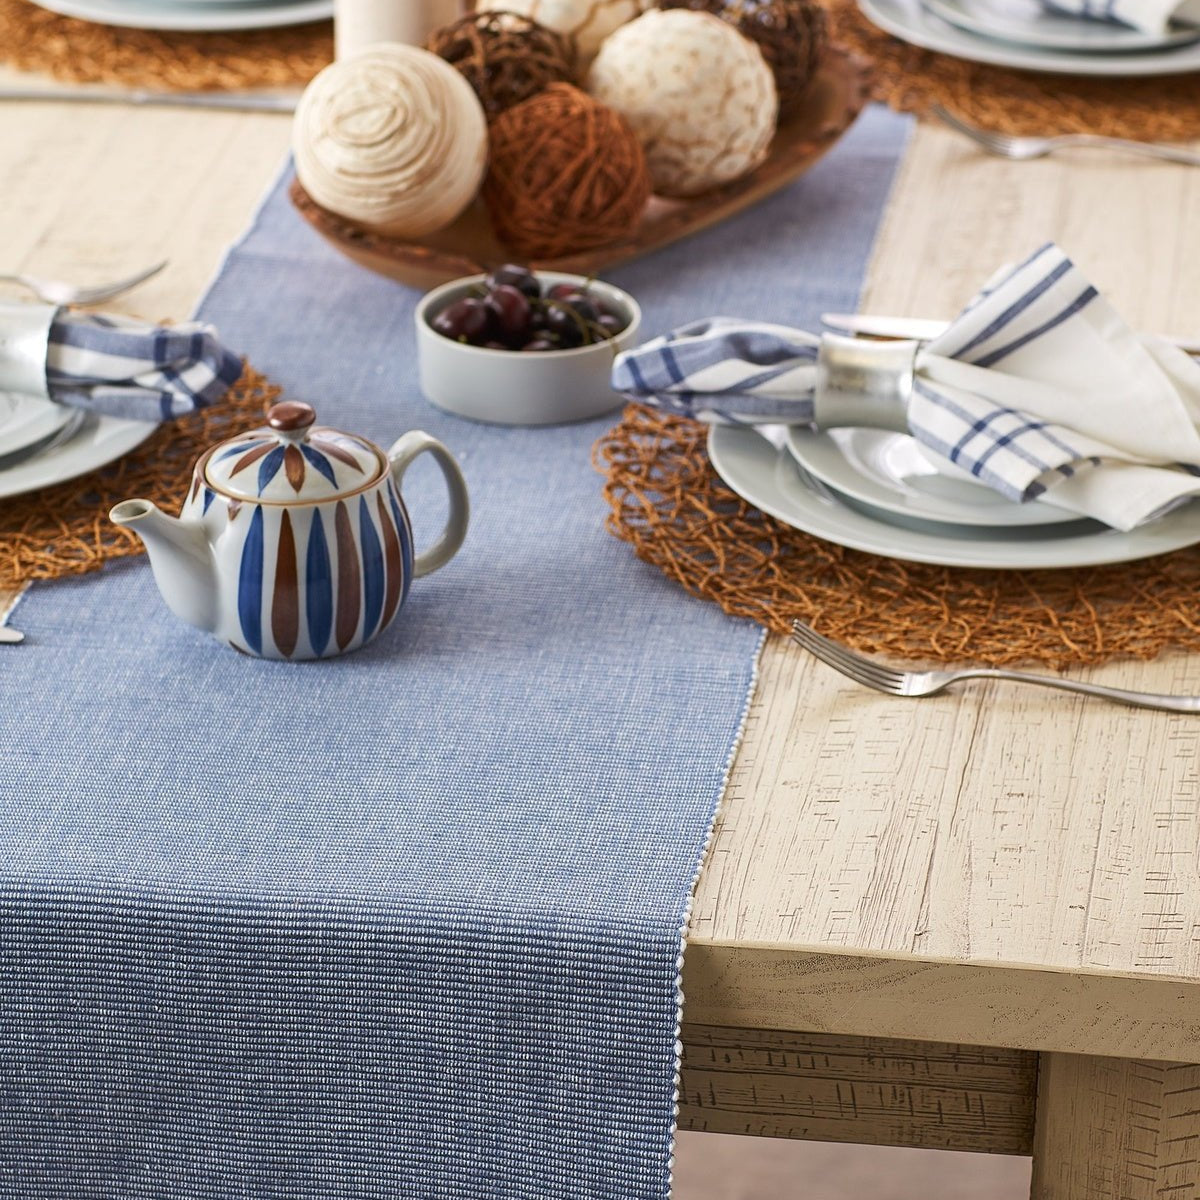 Stonewash Blue & White 2-Tone Ribbed Table Runner 13x72 - Table Runners